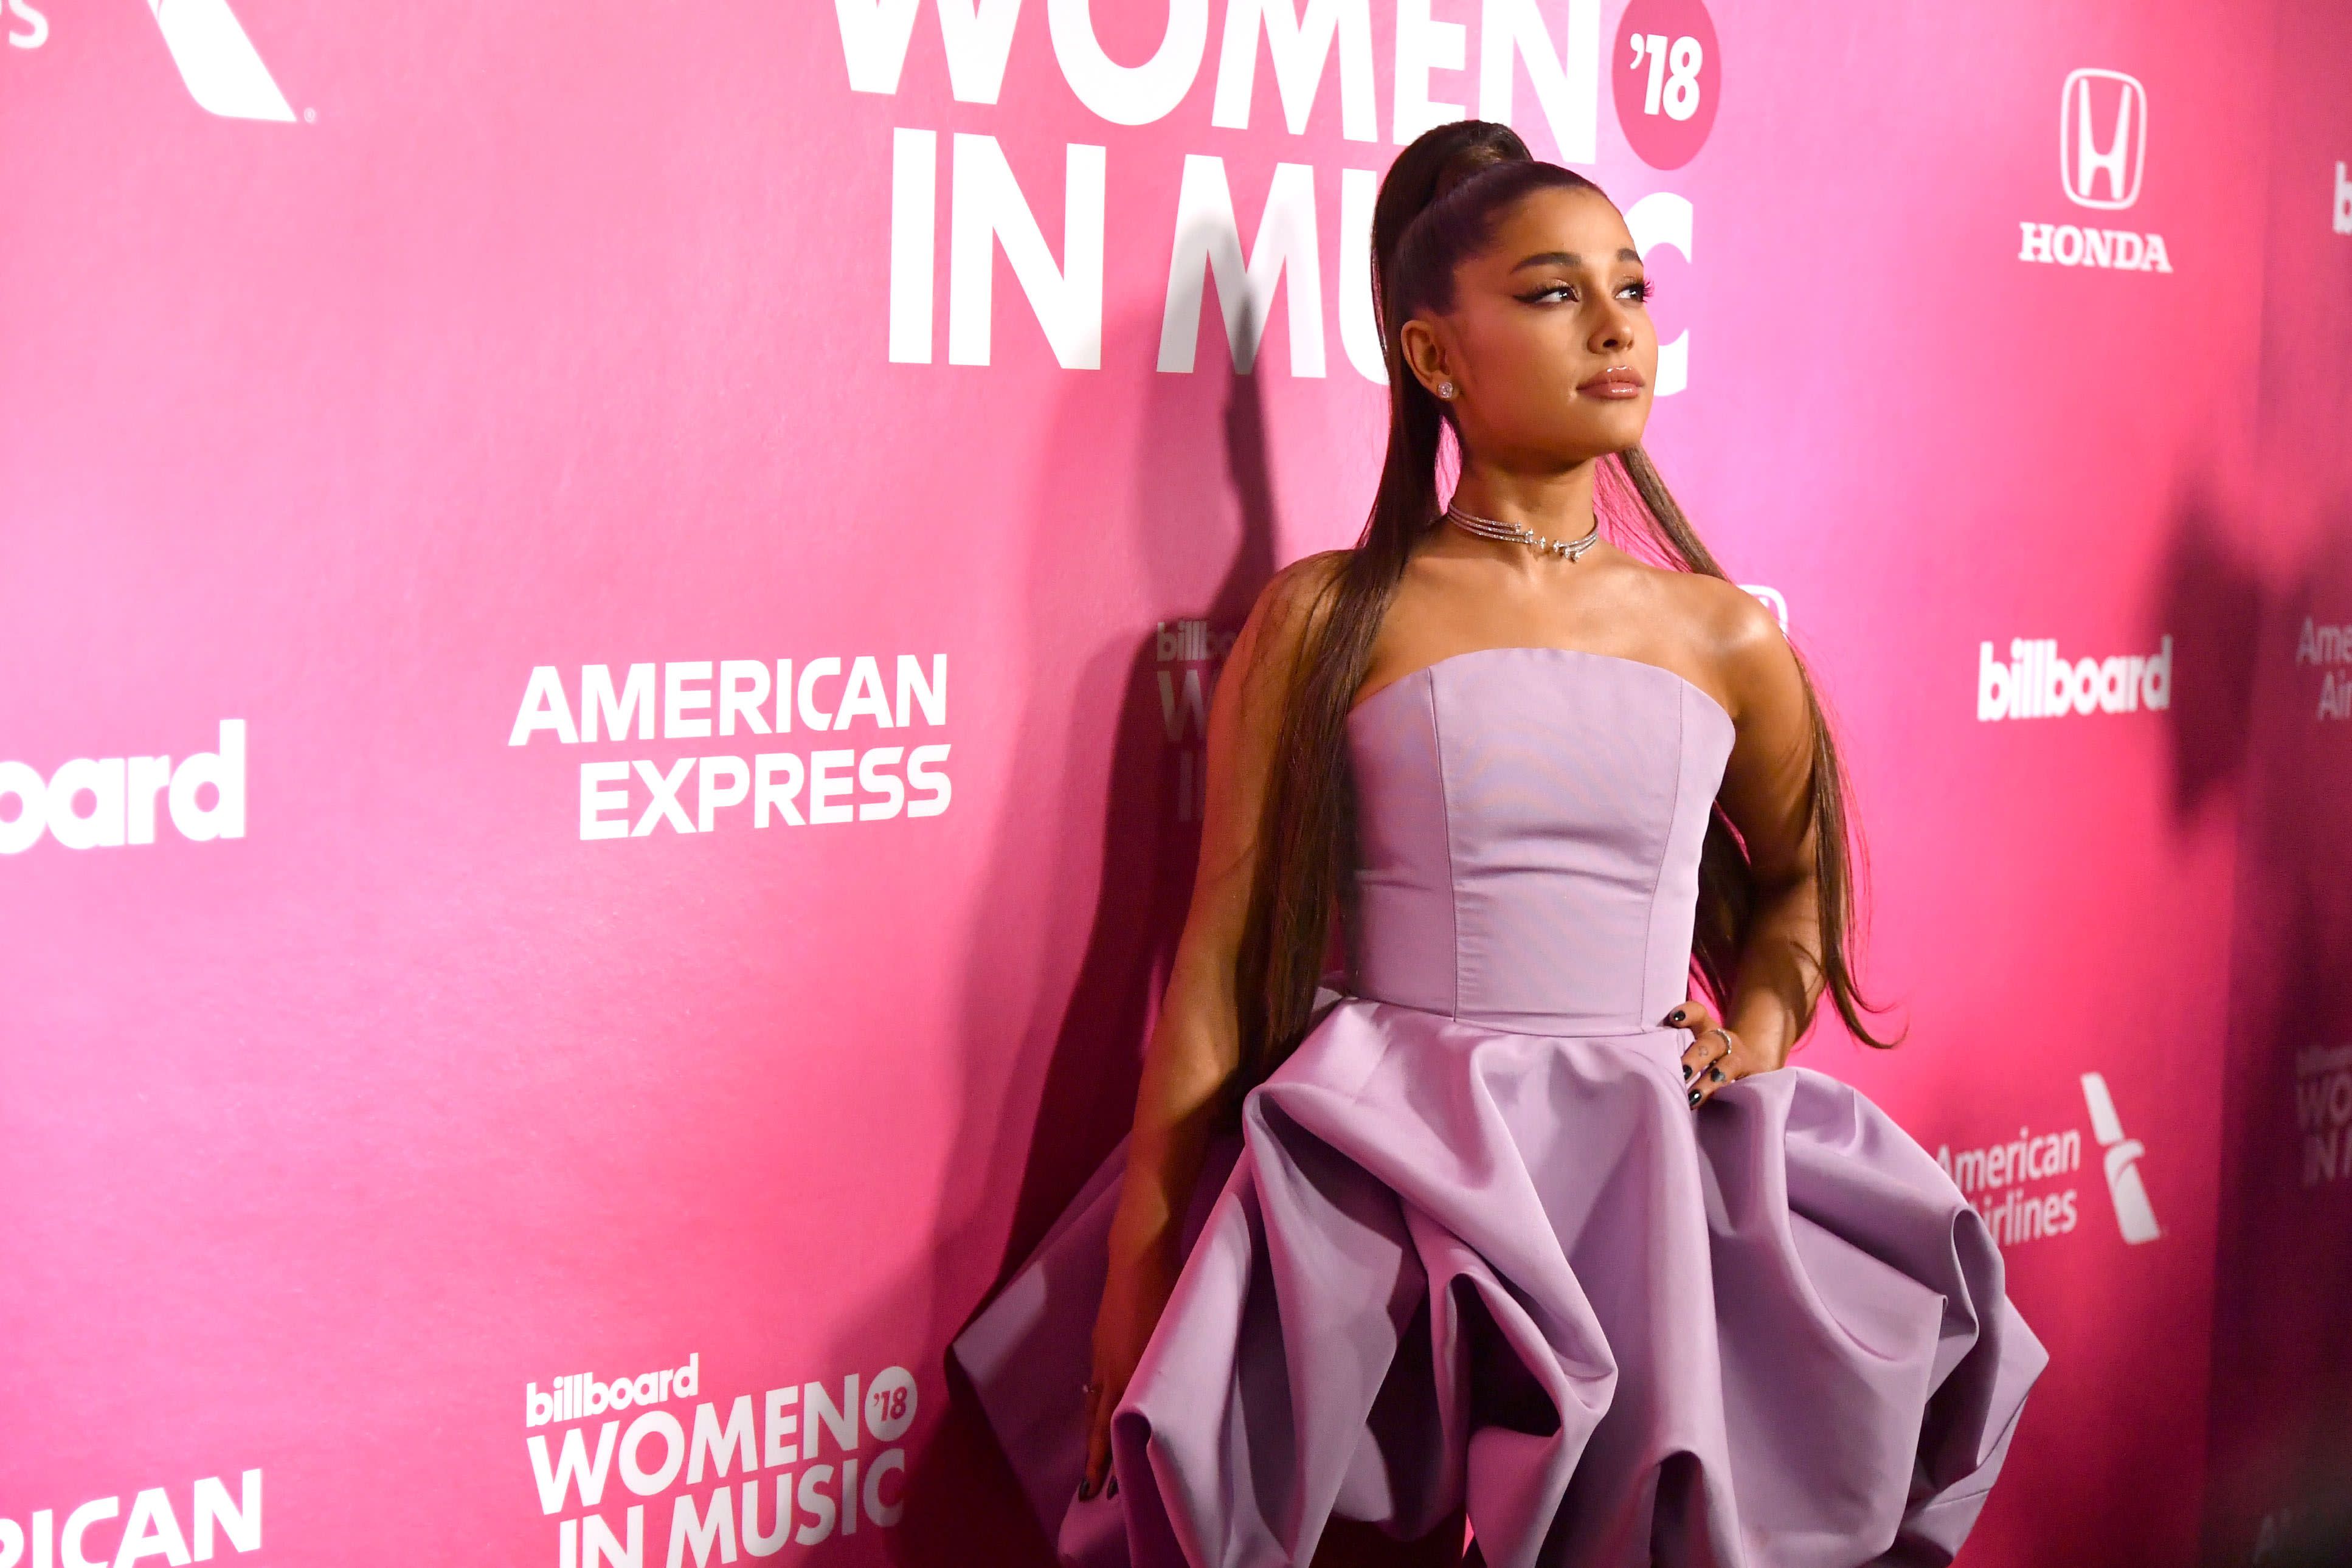 Ariana Grande Gets Political Who Has She Decided to Endorse for the